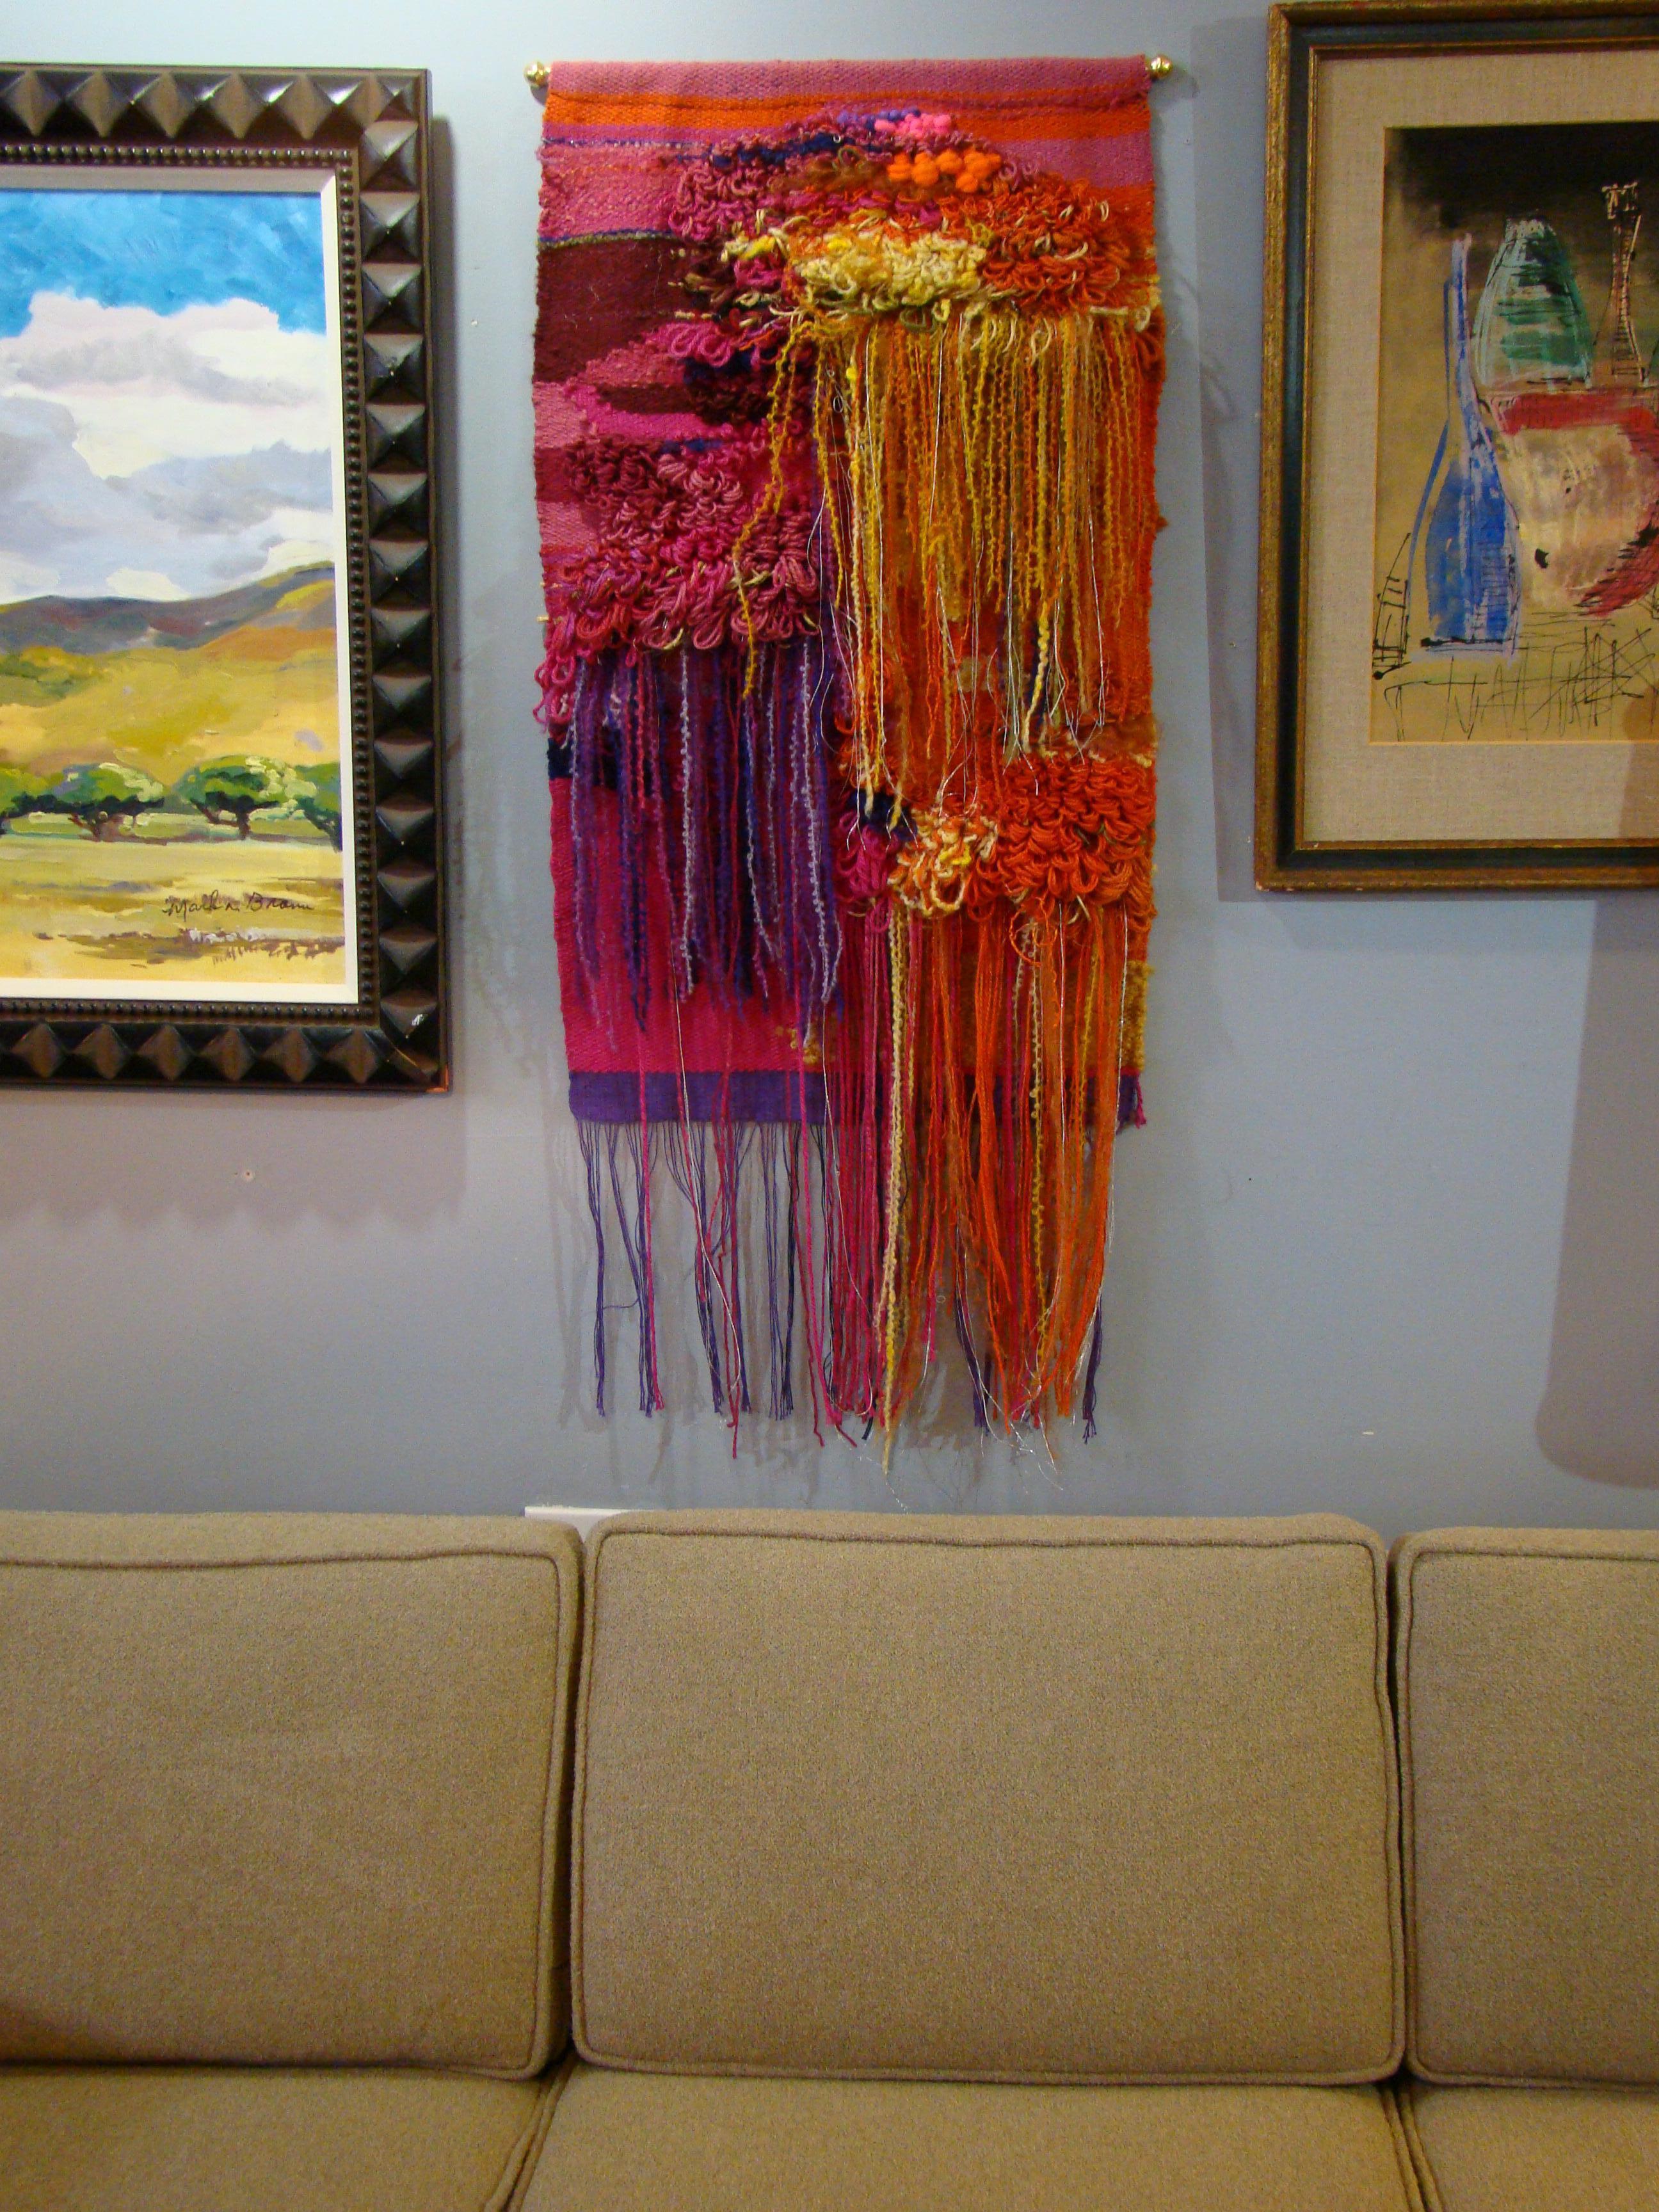 A brilliant abstract composition of raveled yarn art, hand-loomed in a range of oranges, grape and fuchsia. Likely created in the 1970s, signed with the artists label, these works are often under-appreciated and represent tremendous skill, artistry,